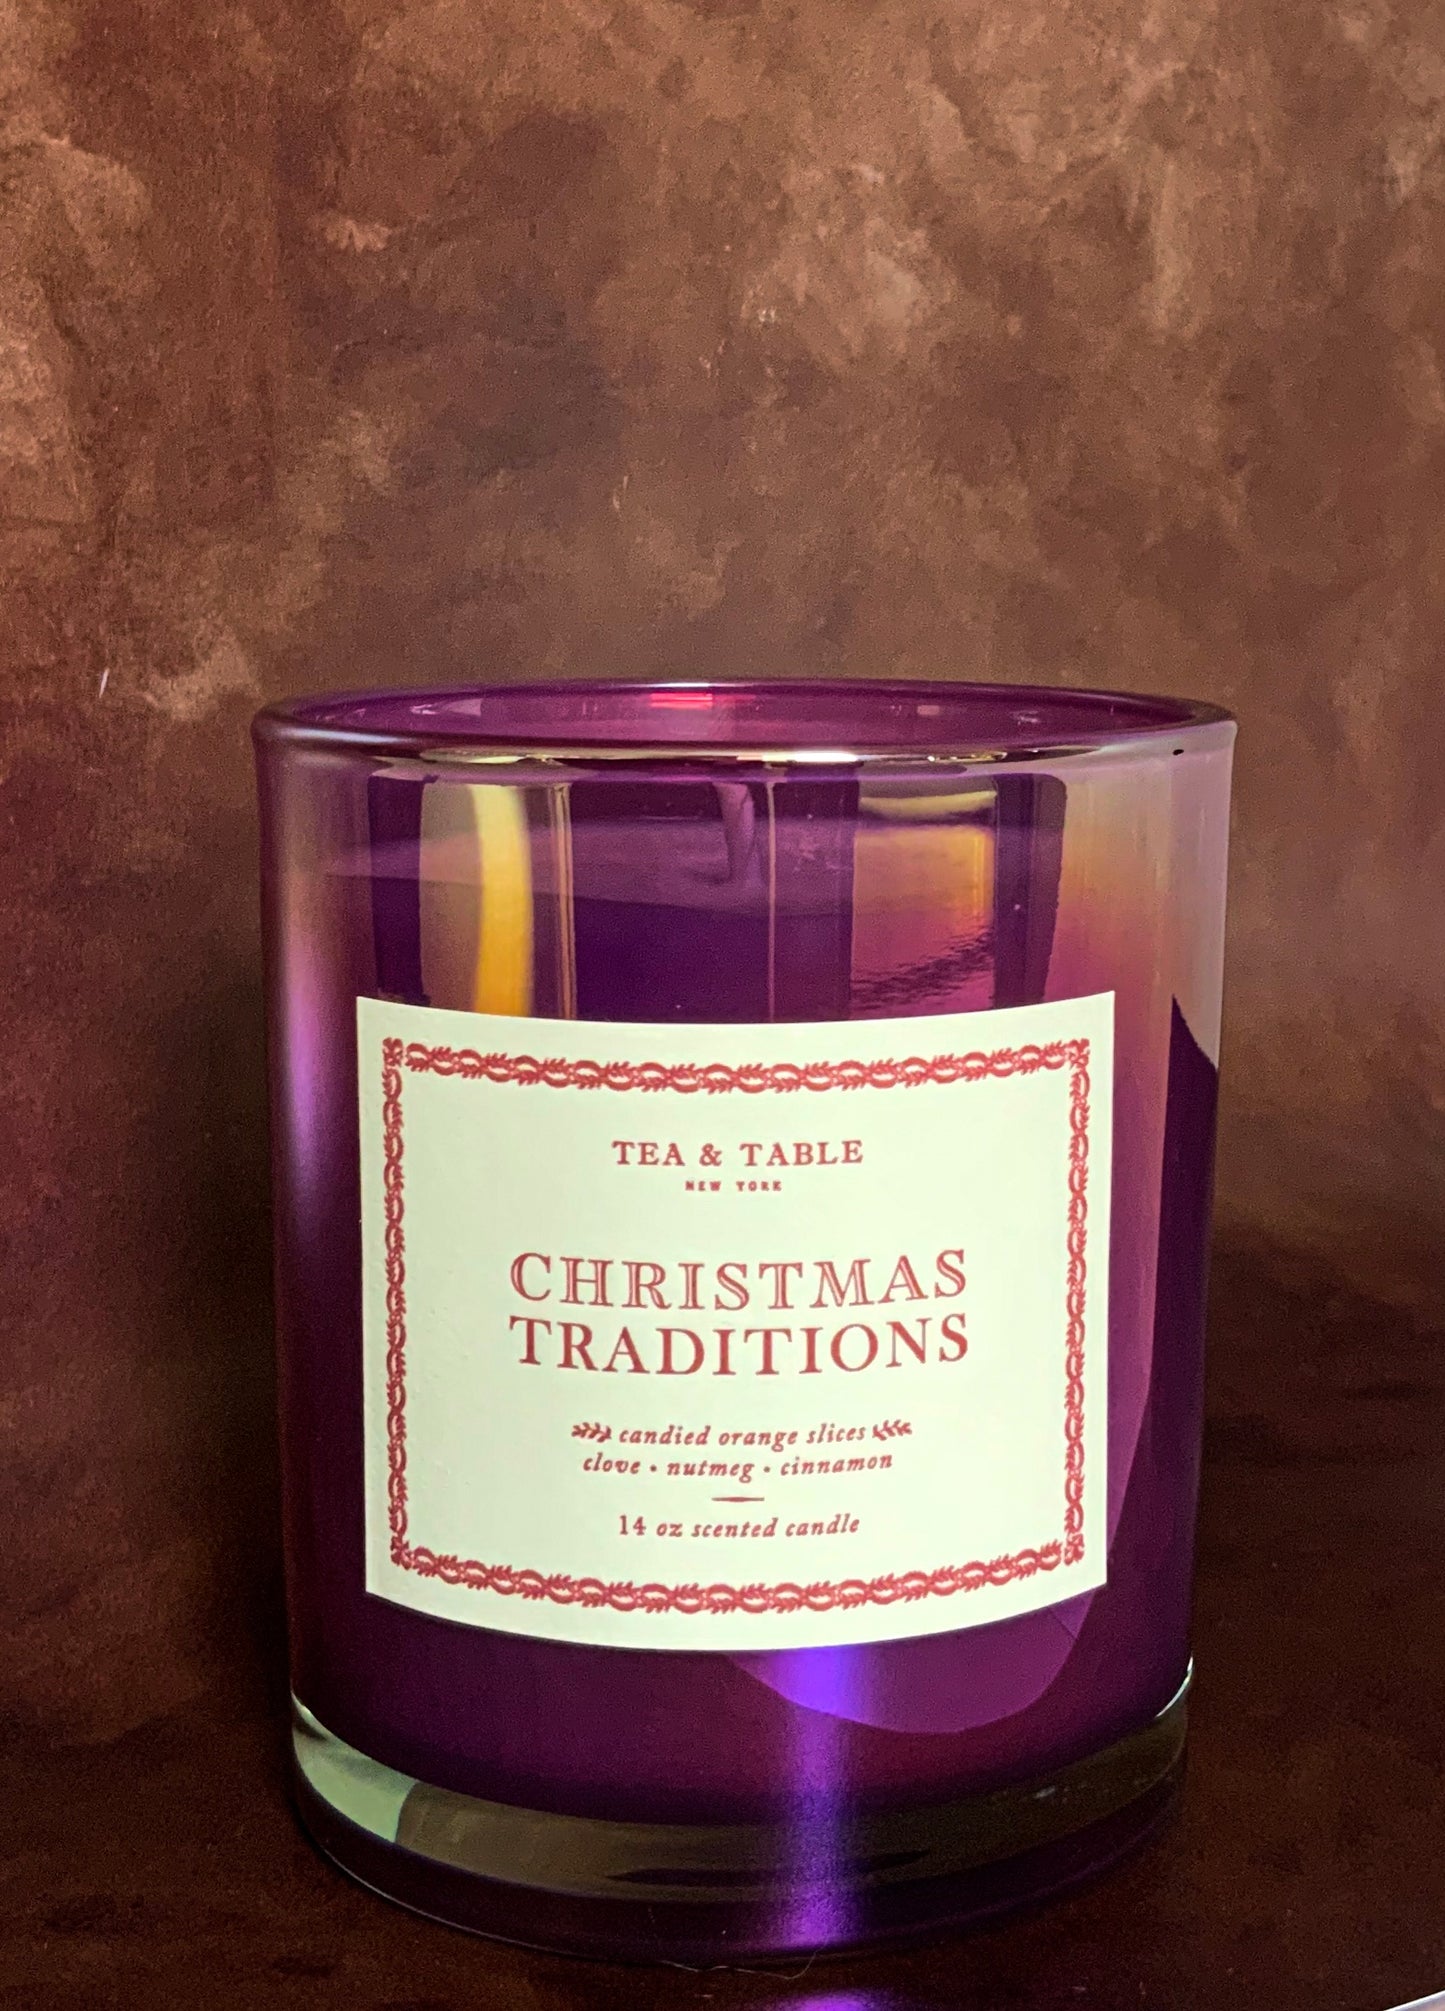 TEA & TABLE NY Limited Edition Candle “Christmas Traditions”